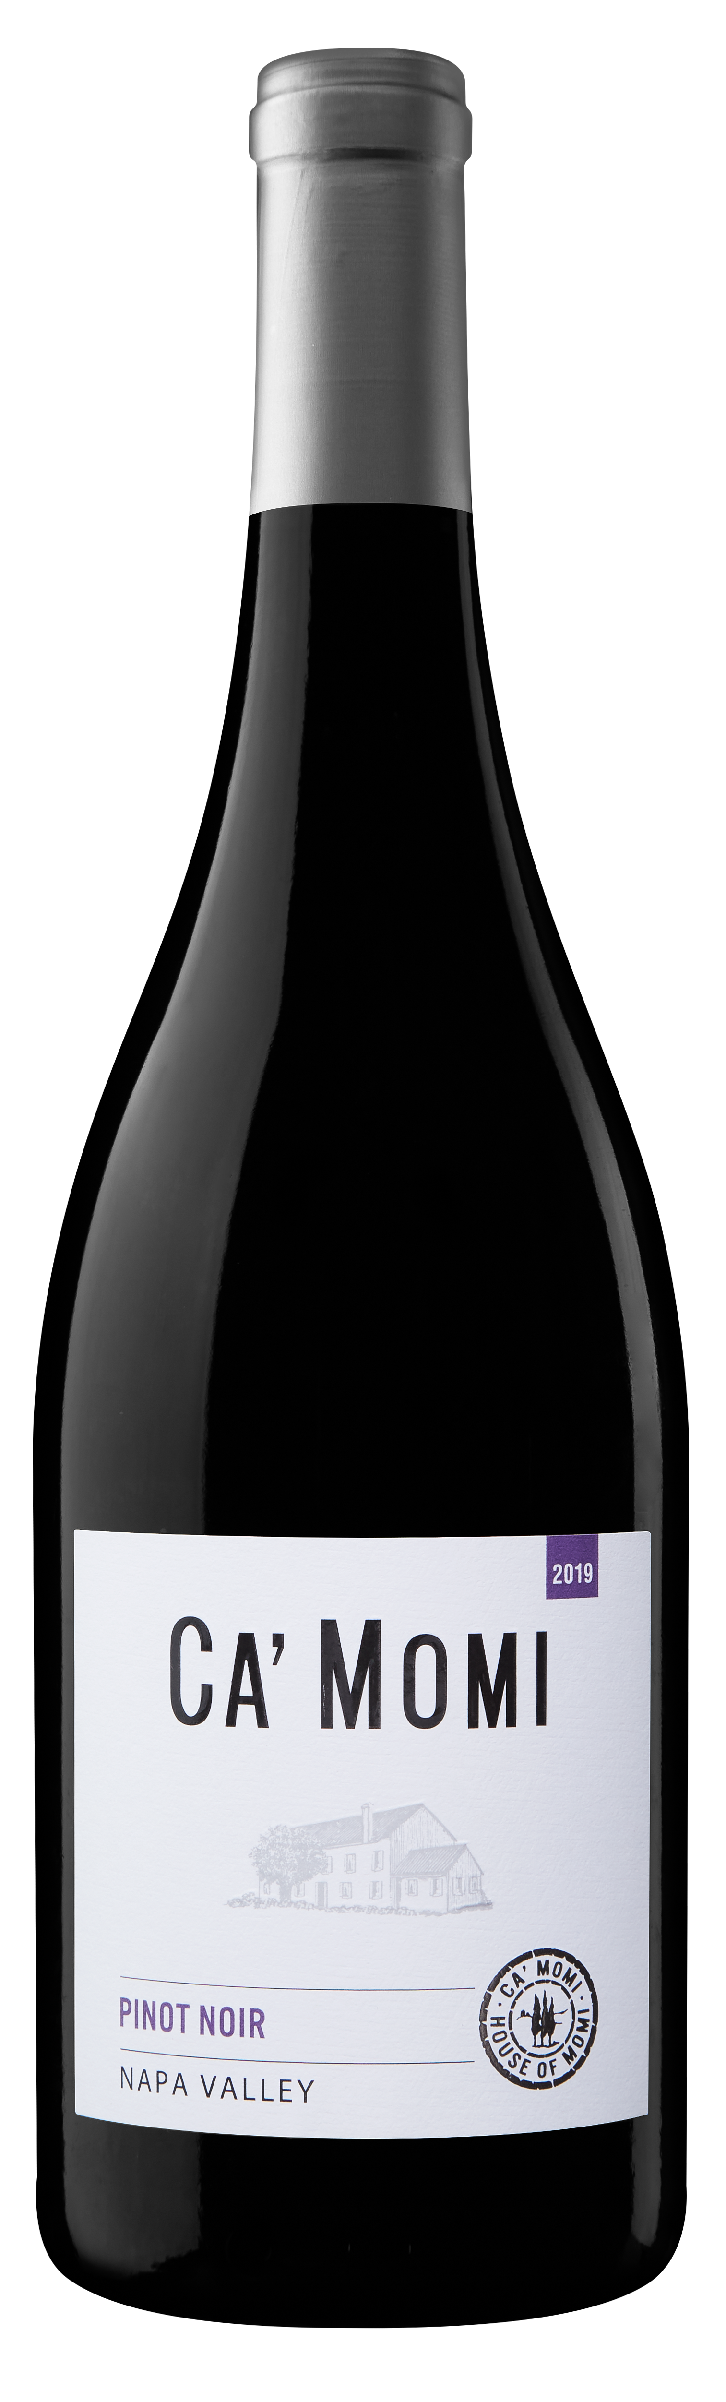 2019 PINOT NOIR NAPA VALLEY Ca' Momi Winery Heartcrafted in the